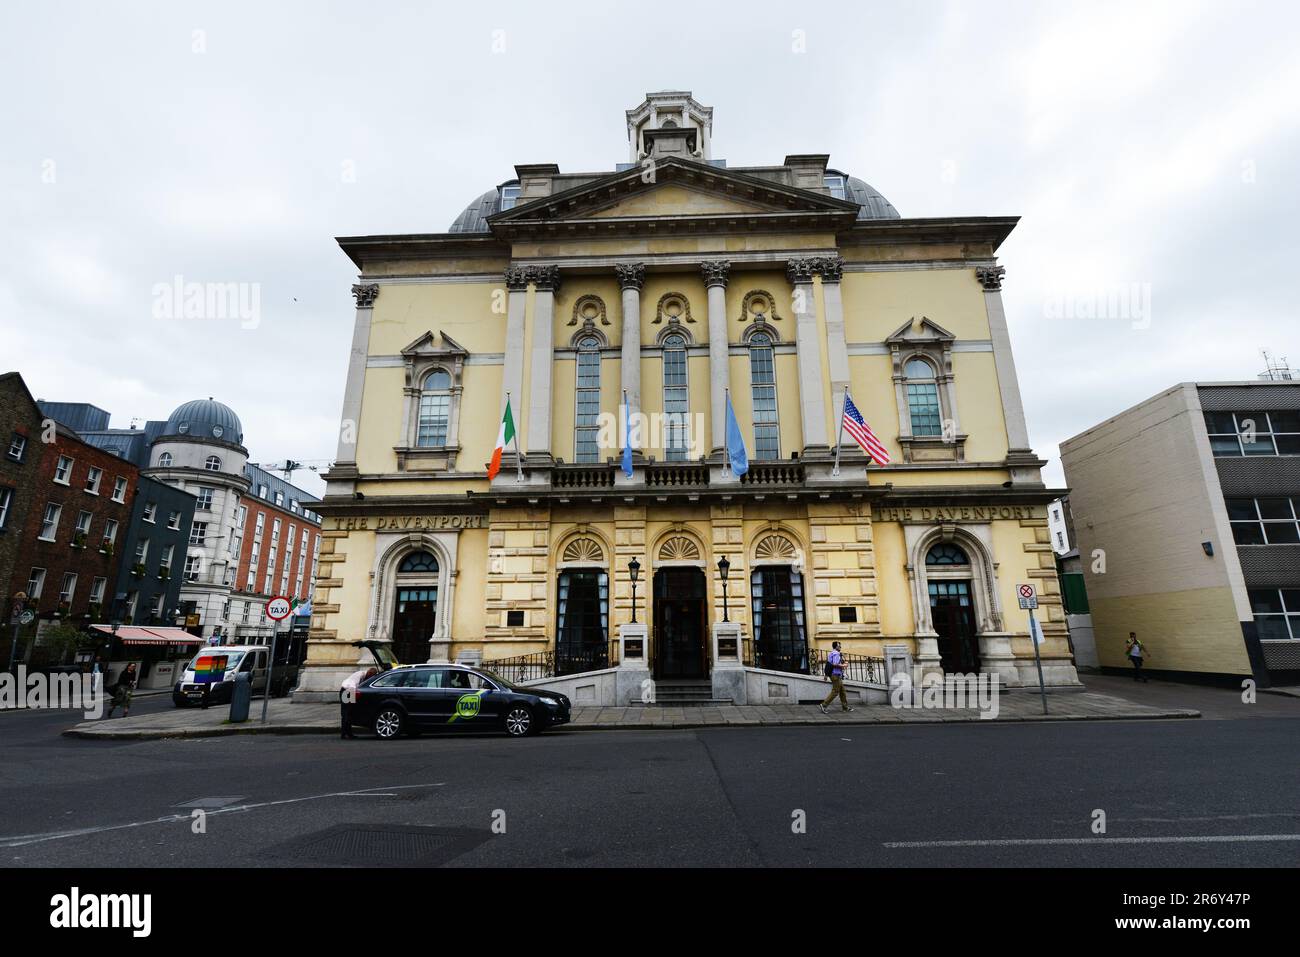 The Davenport hotel / Merrion Hall at the Merrion Square in Dublin, Ireland. Stock Photo